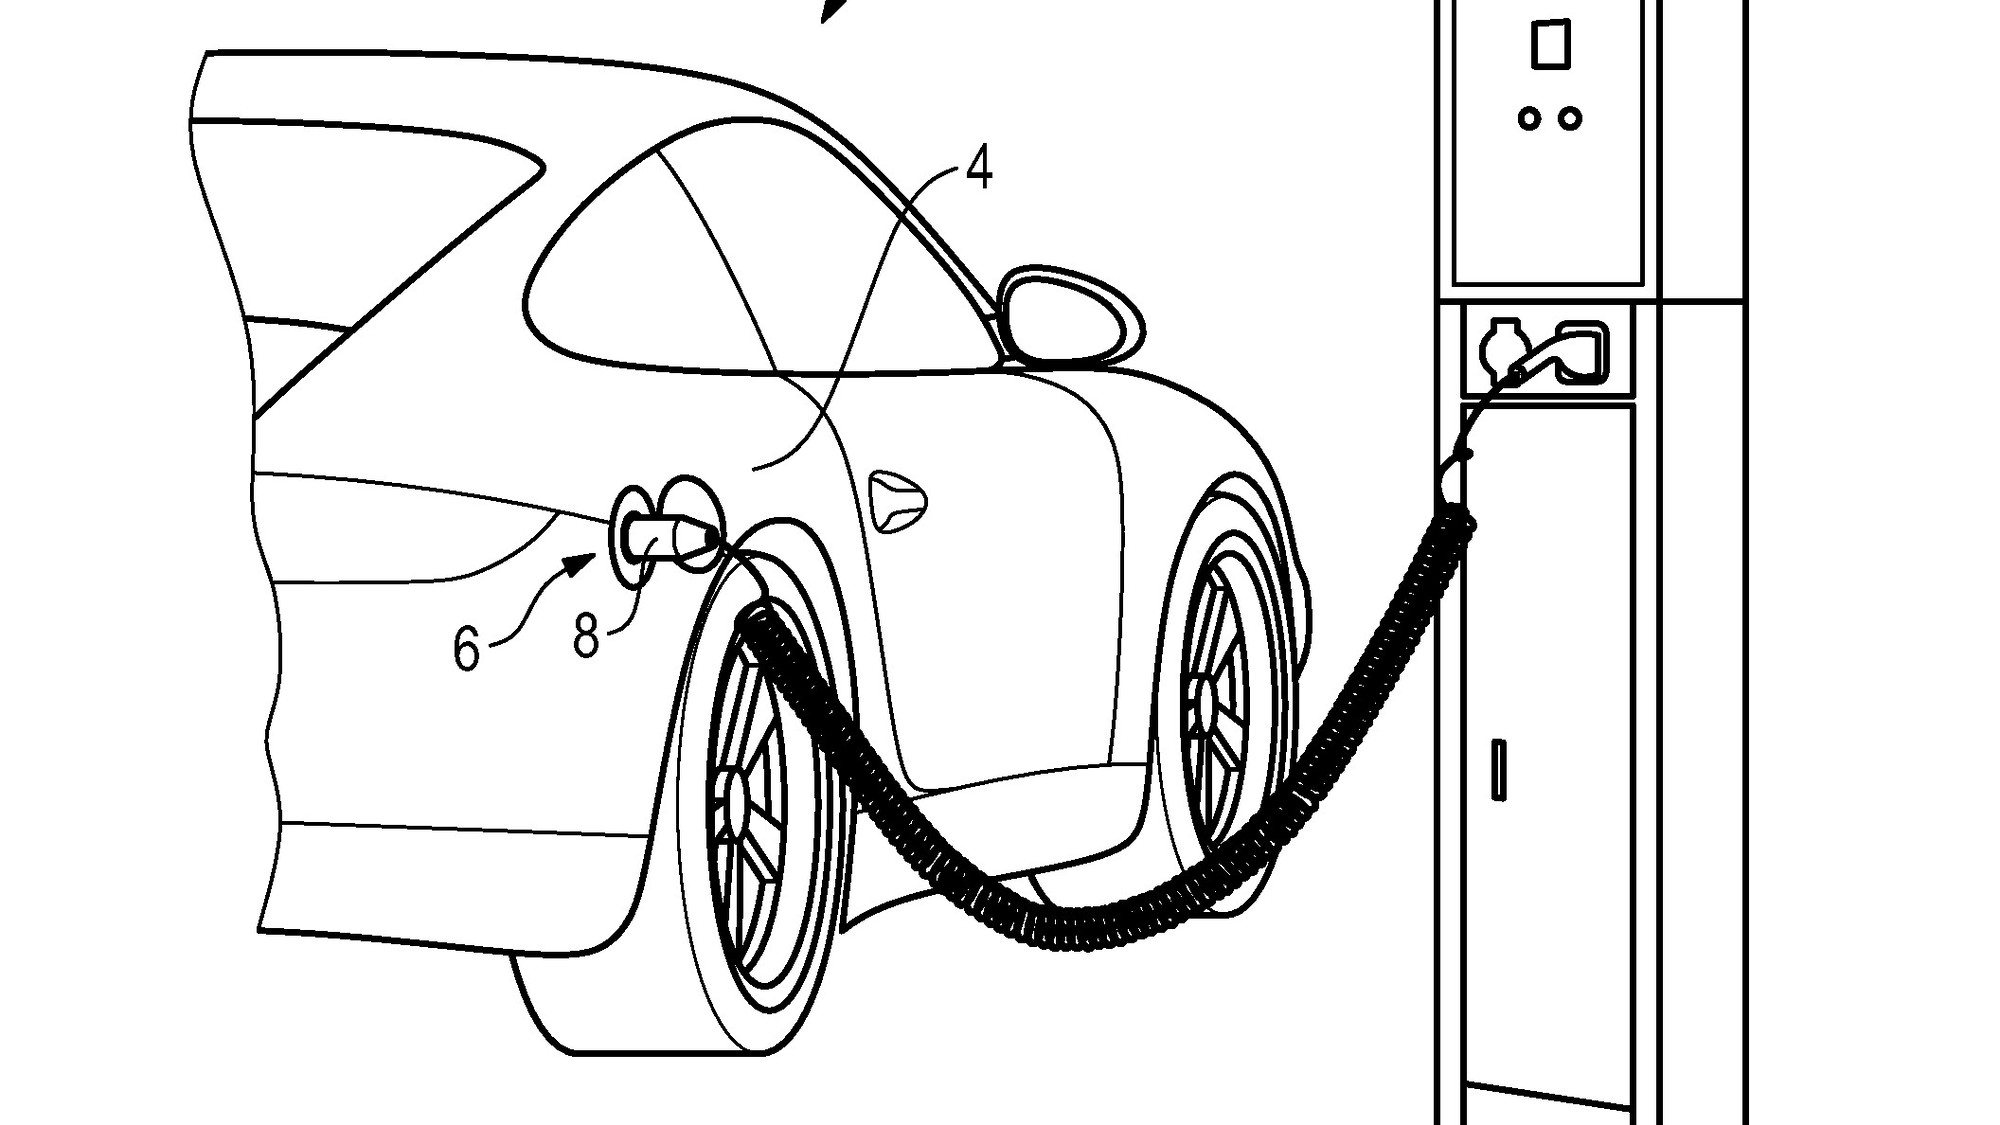 Porsche charging connector patent drawings